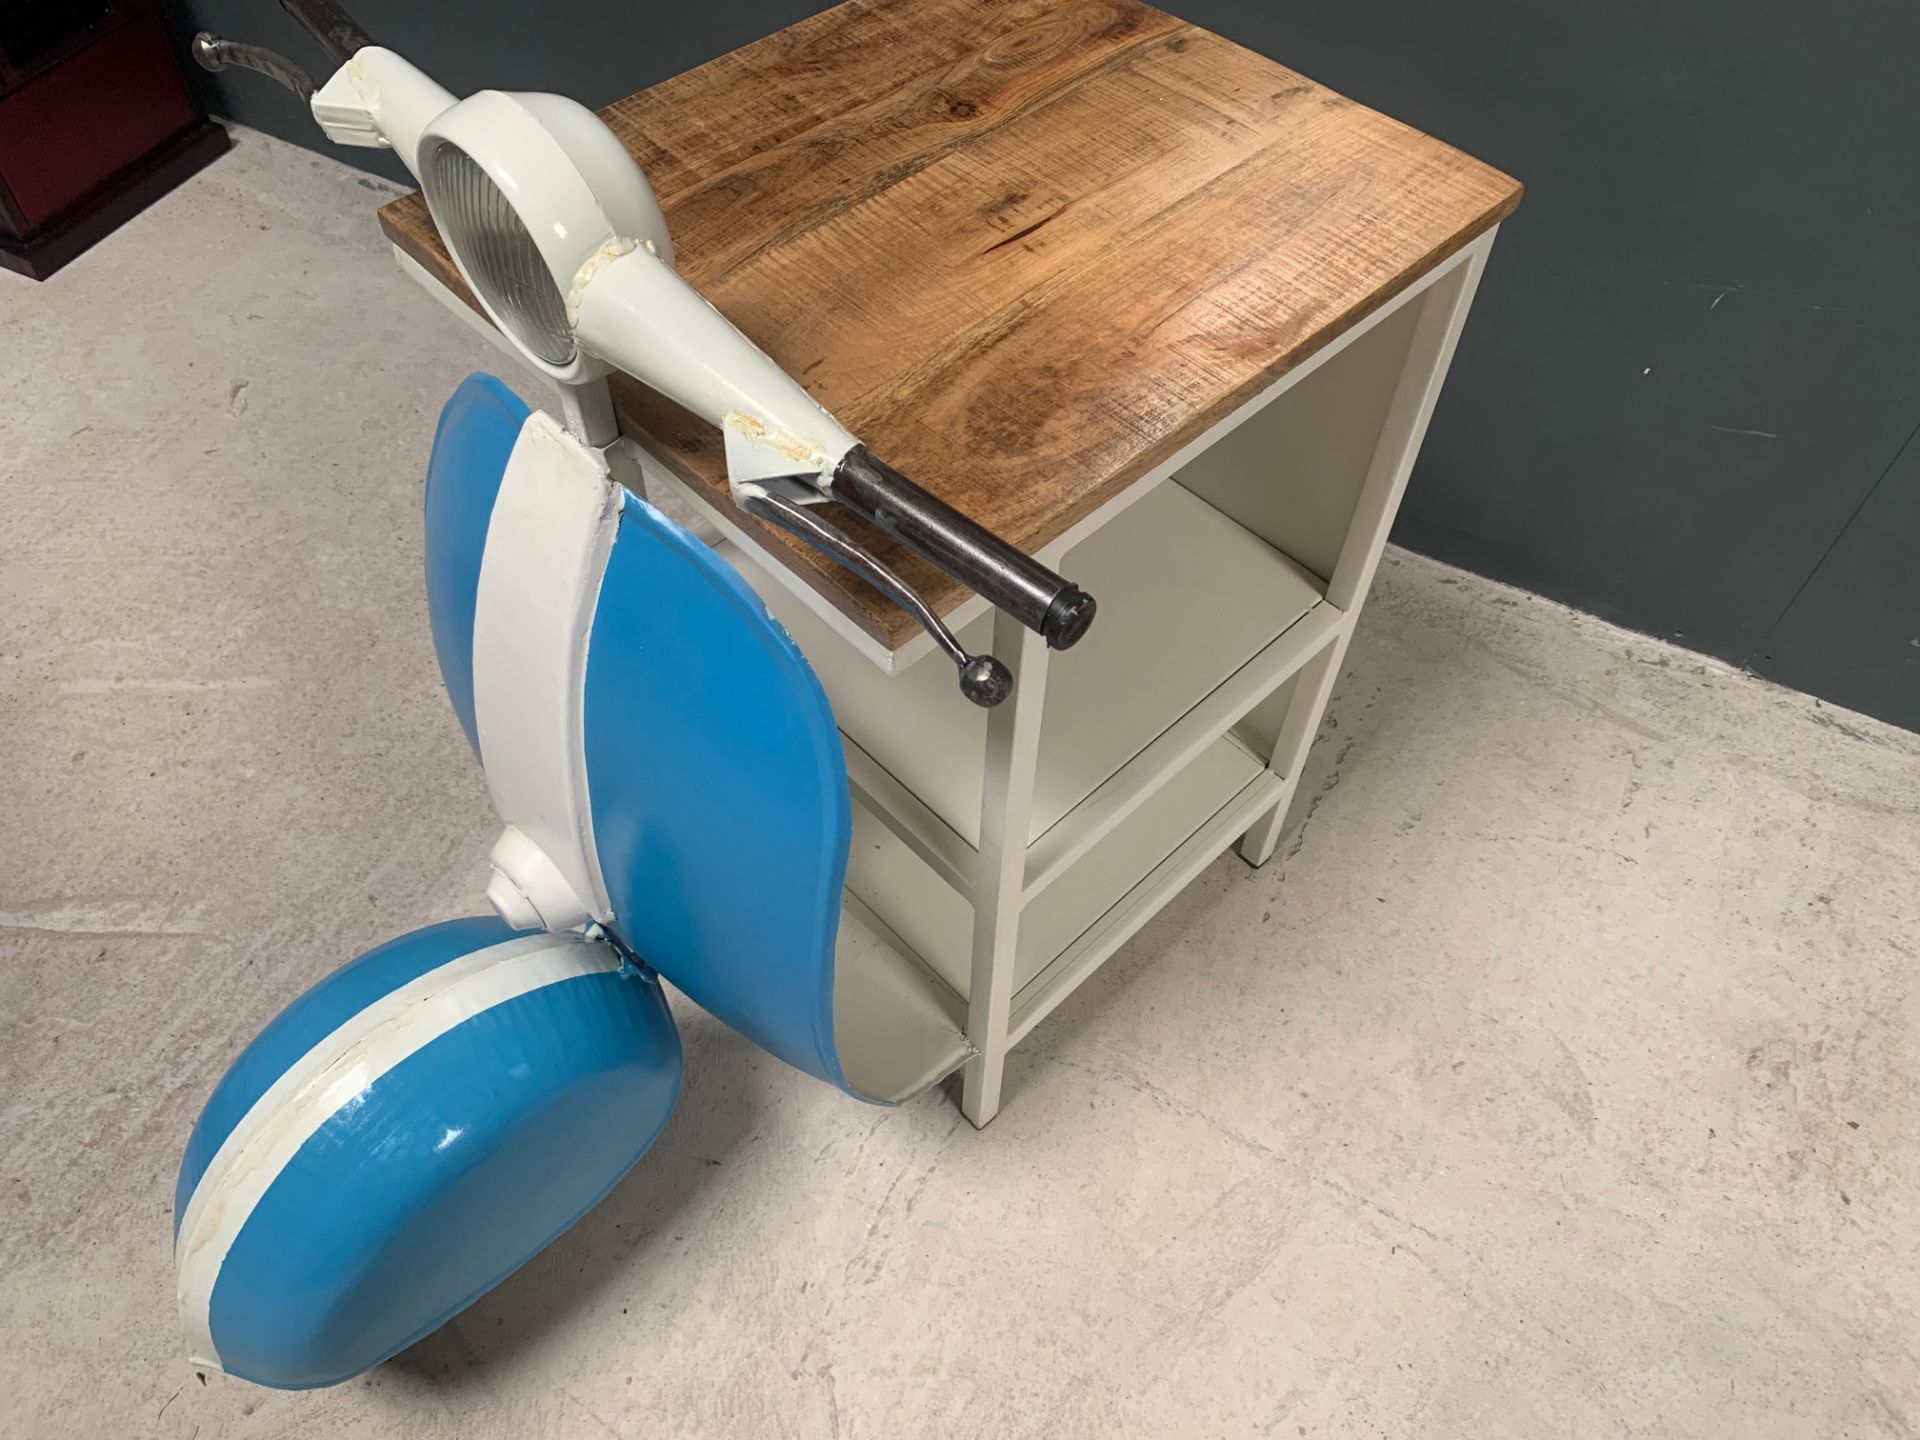 Brand New Boxed Blue And White Vintage Retro Vespa Side Tables With Handle Bars + Wheel - Image 3 of 4